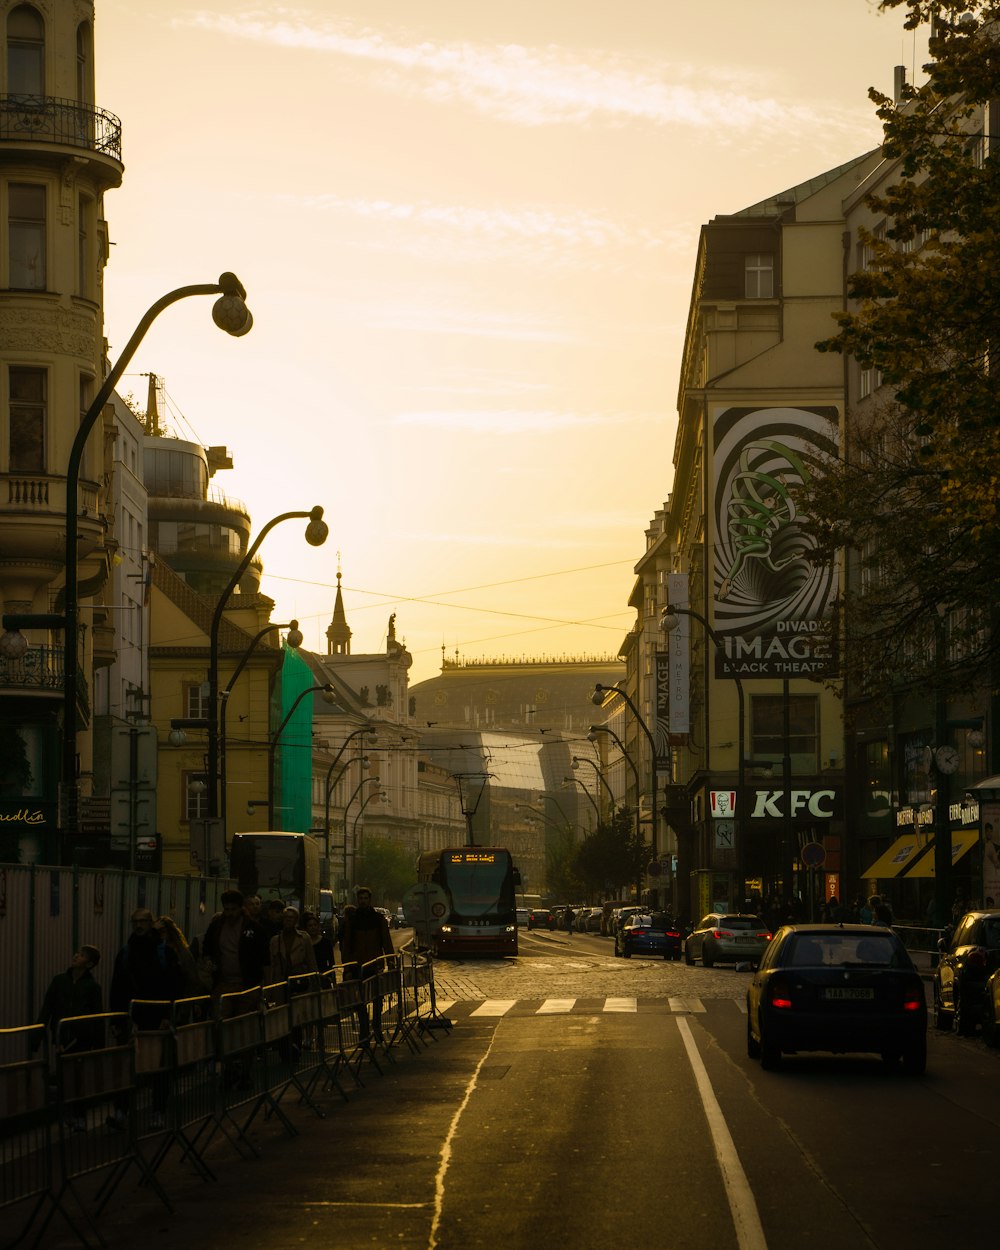 a city street at sunset with a bus on the road